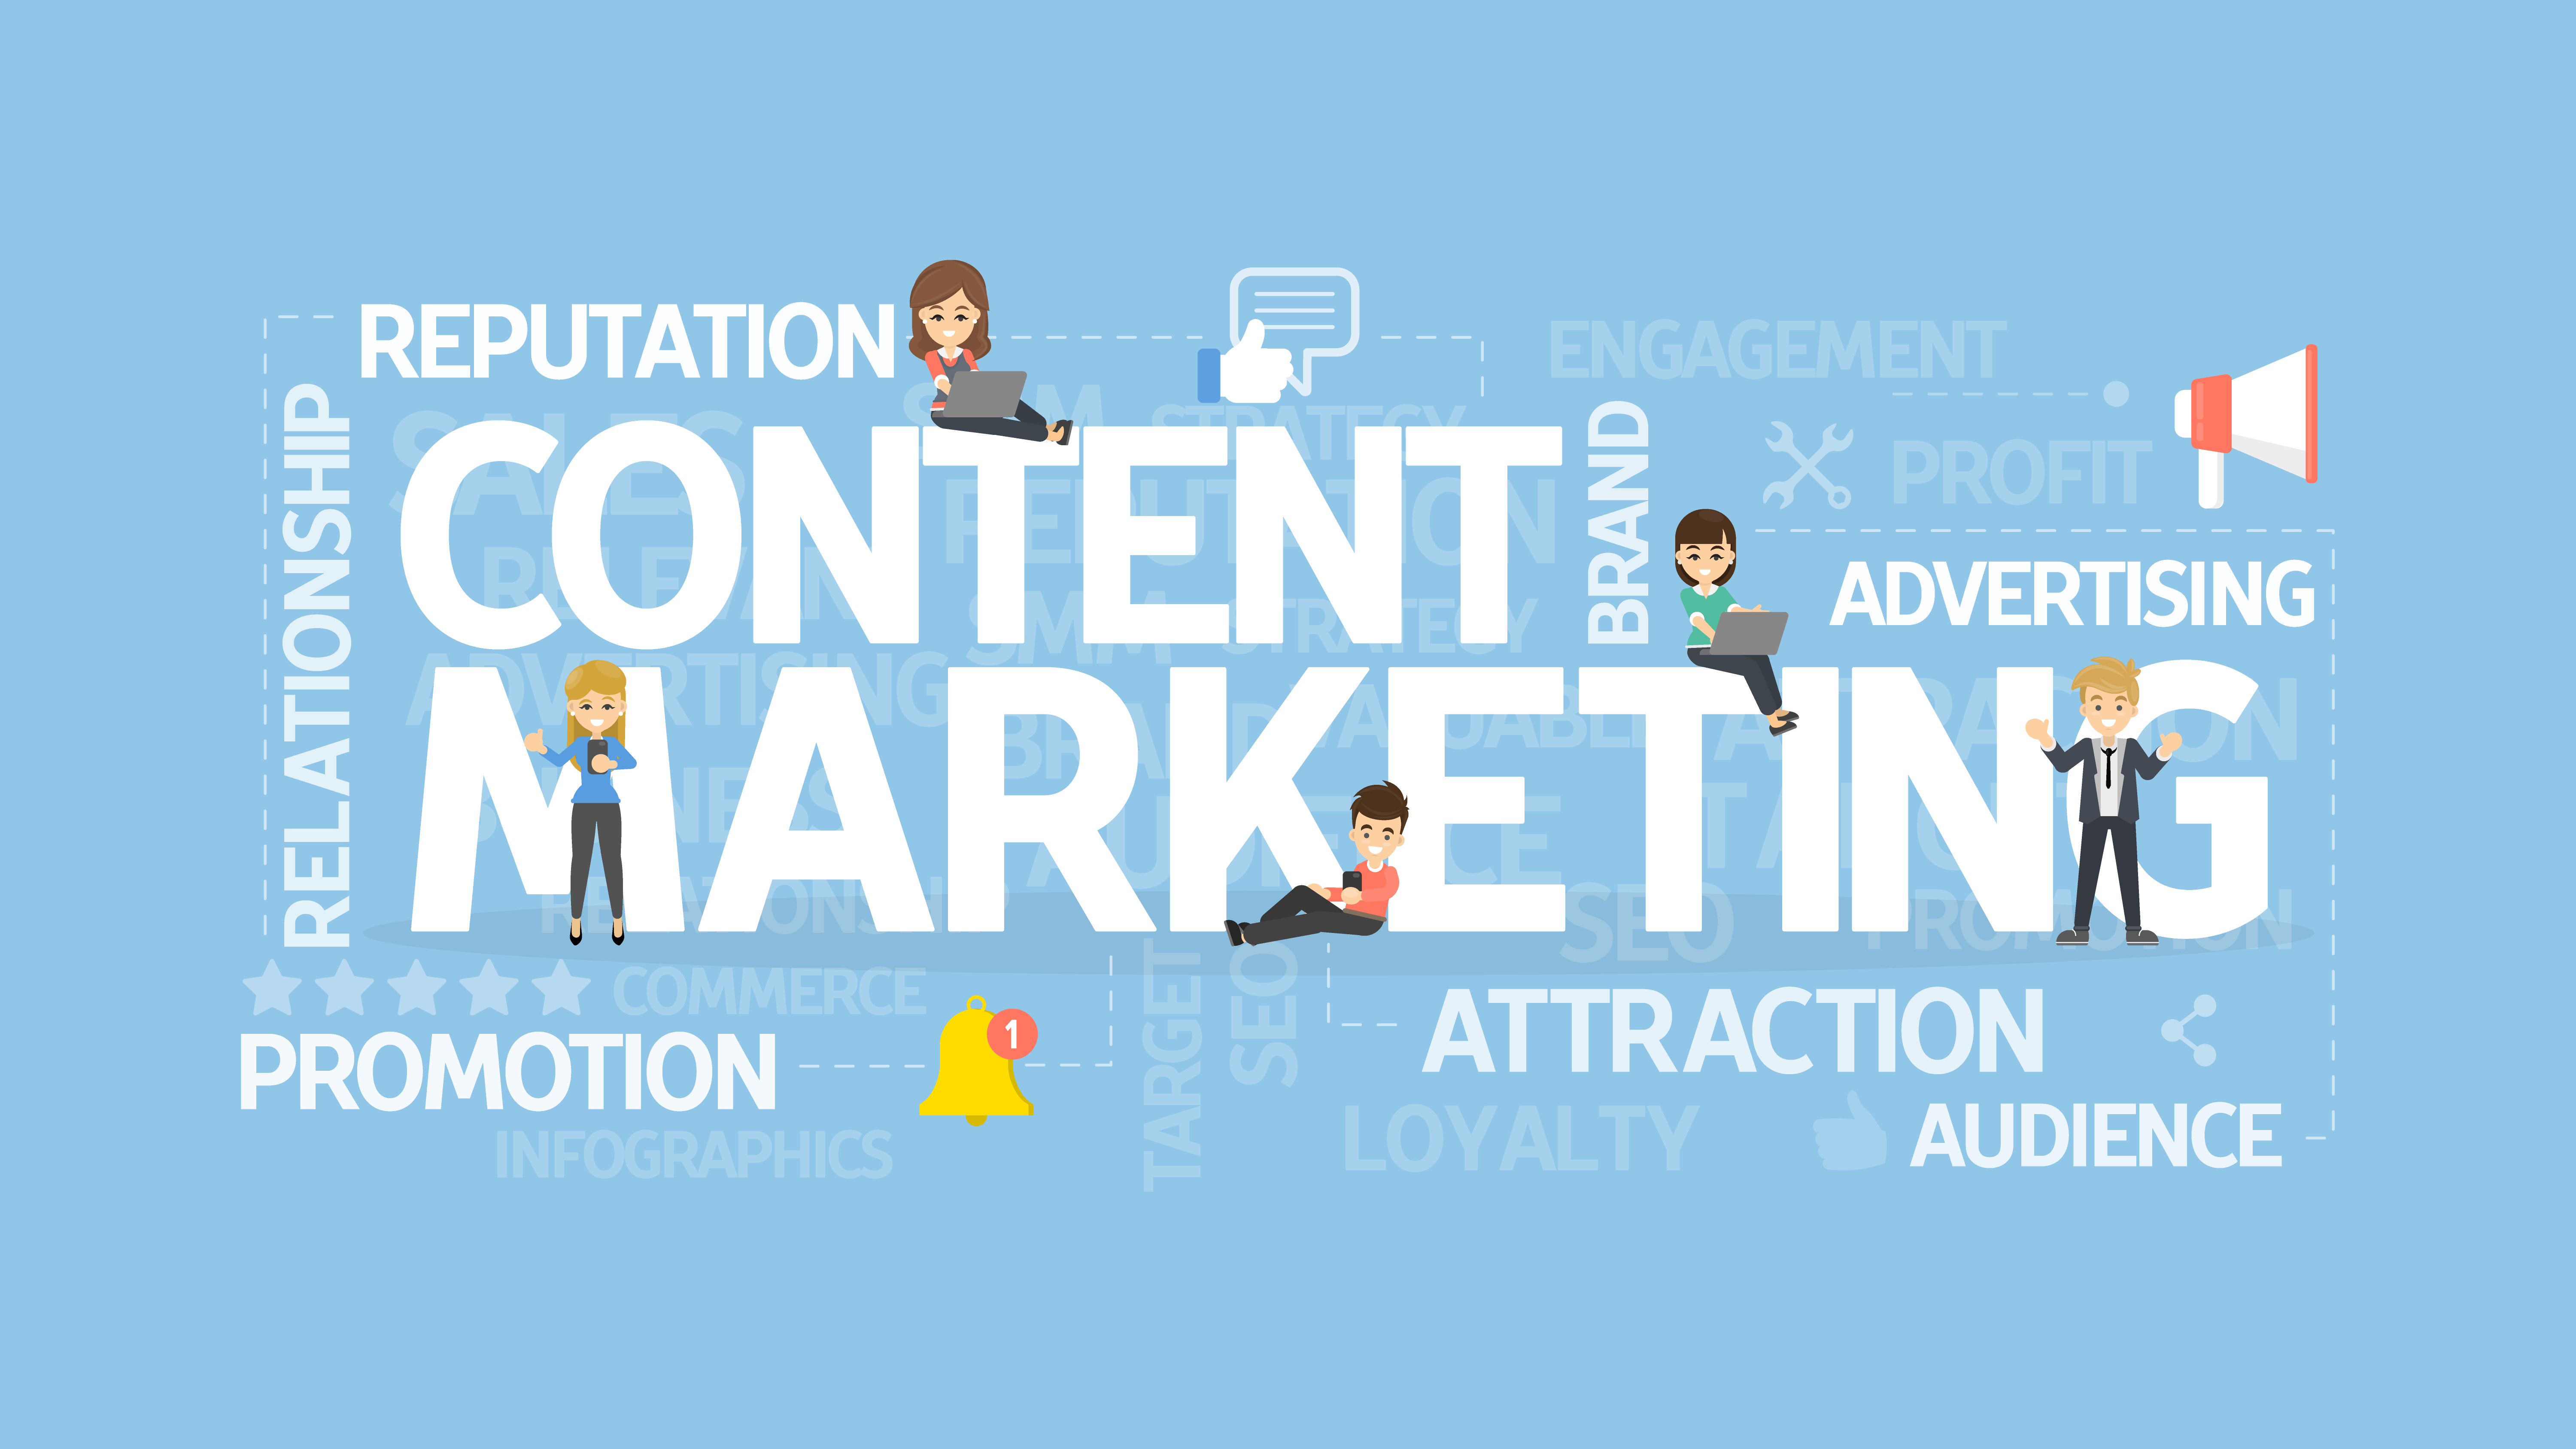 Content Marketing services